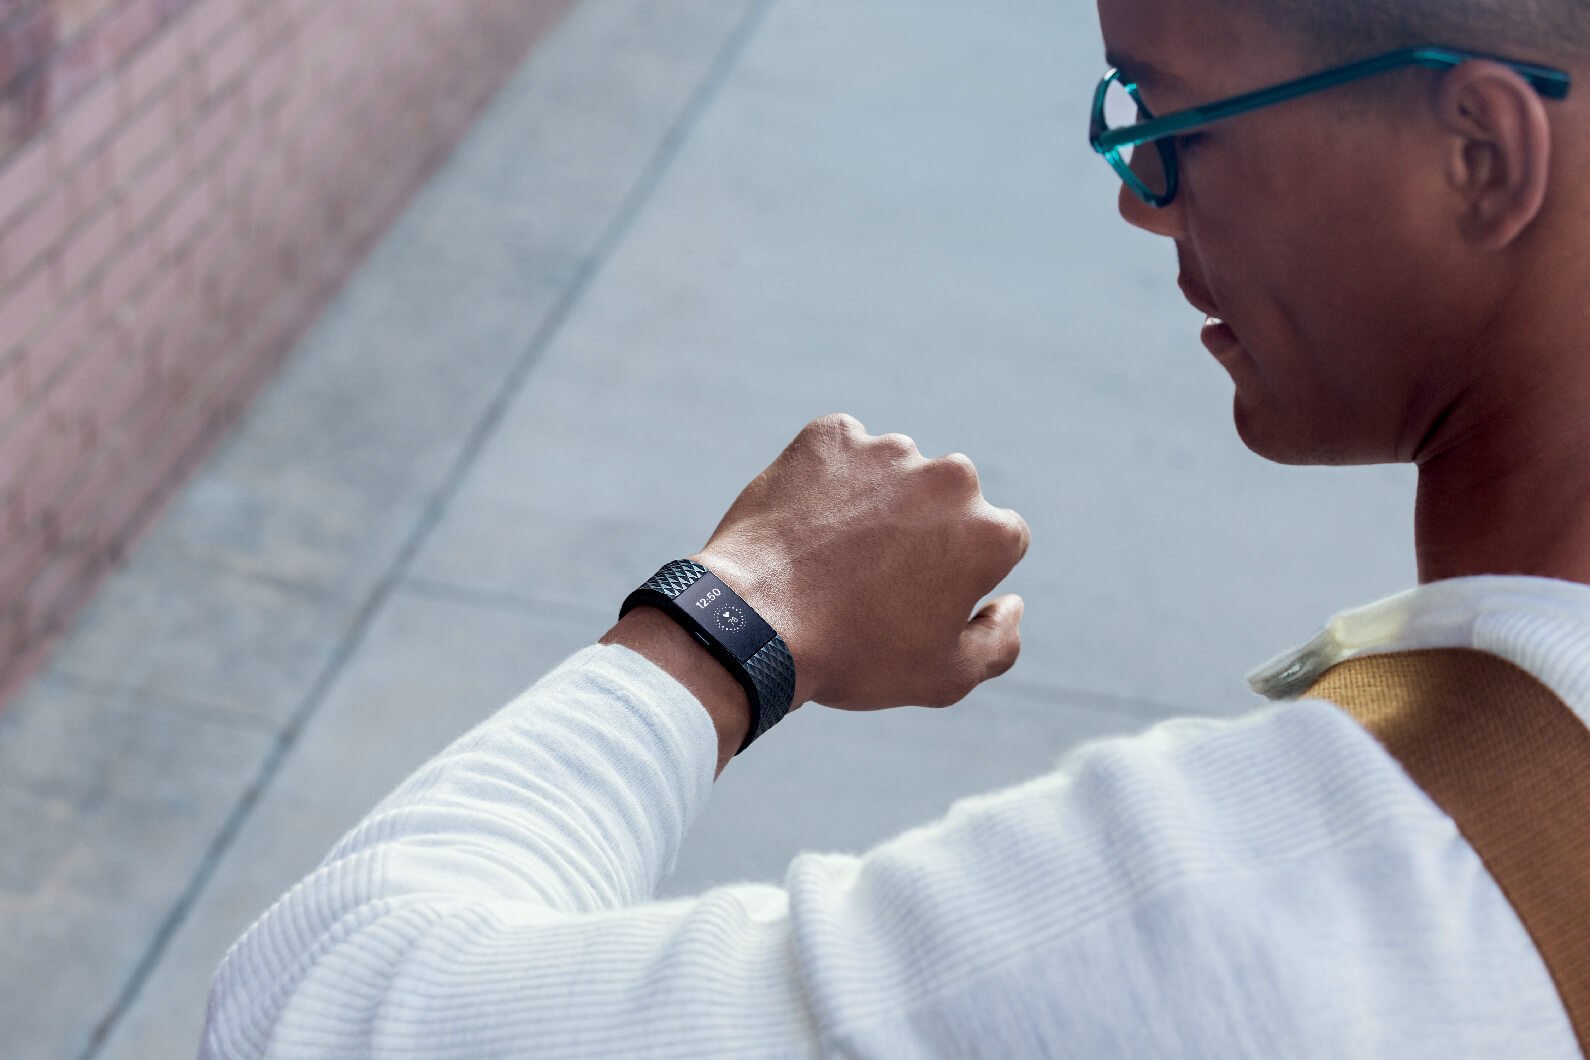 Fitbit launches healthcare platform for insurance and employers | Fierce Biotech